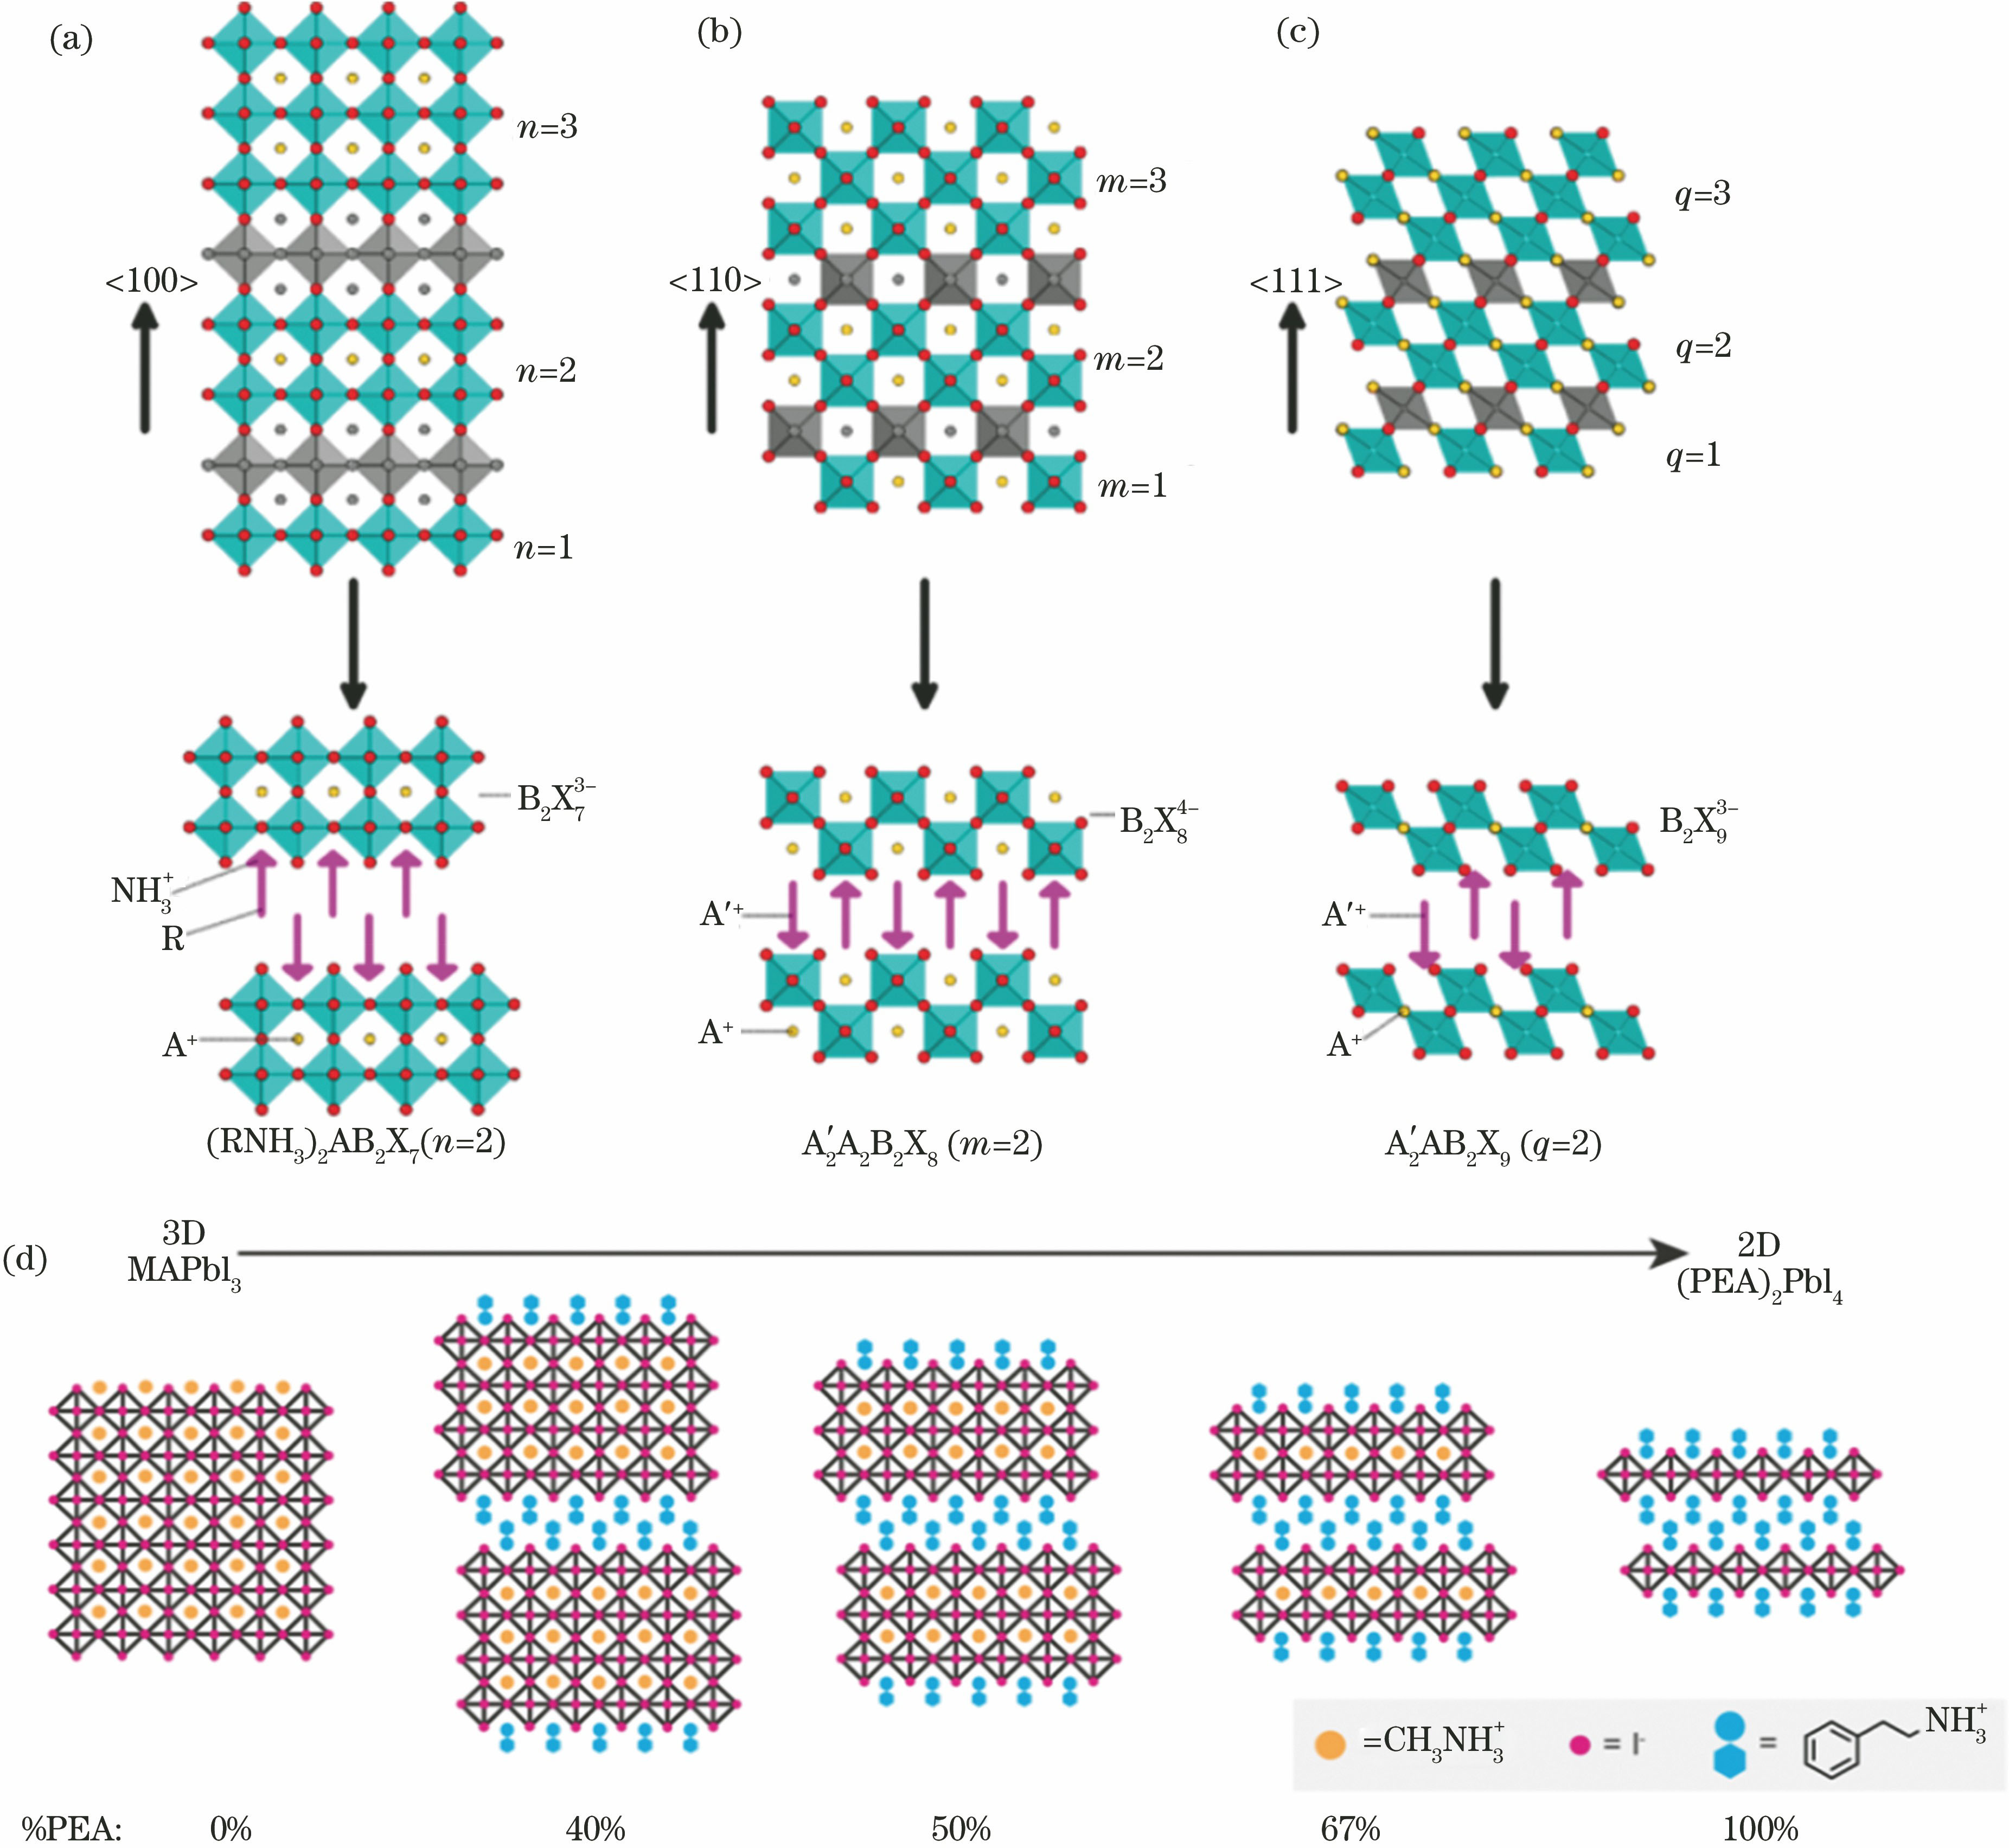 Schematic of a two-dimensional perovskite structure cut from different directions of three-dimensional perovskites. (a) orientation; (b) orientation; (c) orientation [31]; (d) crystal structure diagram of MAPbI3, (PEA)2PbI4 and mixed MA-PEA two-dimensional perovskite materials[32]